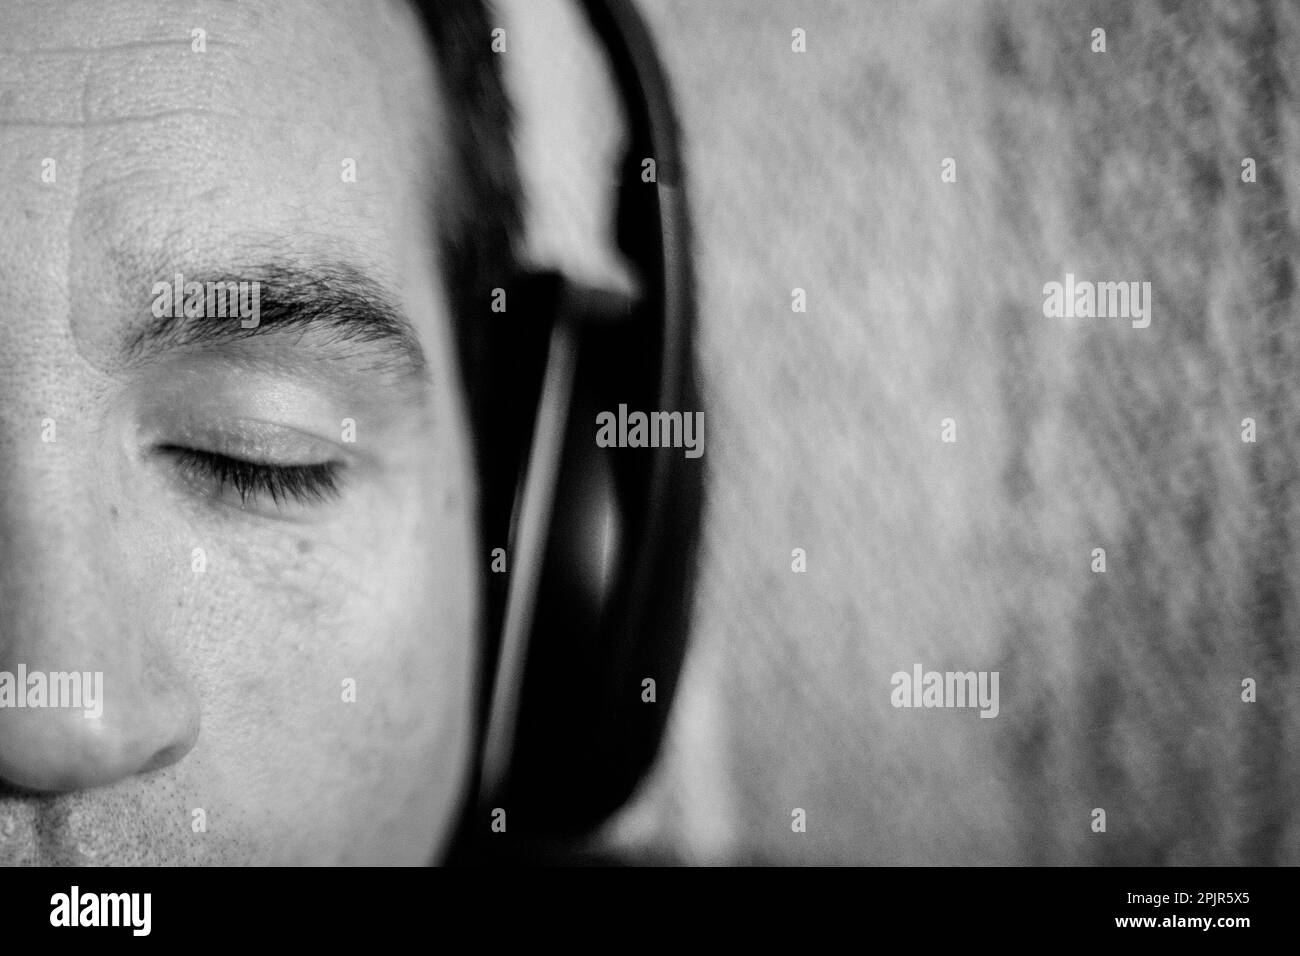 A close up of a man's face with his eyes closed.  The man is listening to music through headphones. Stock Photo